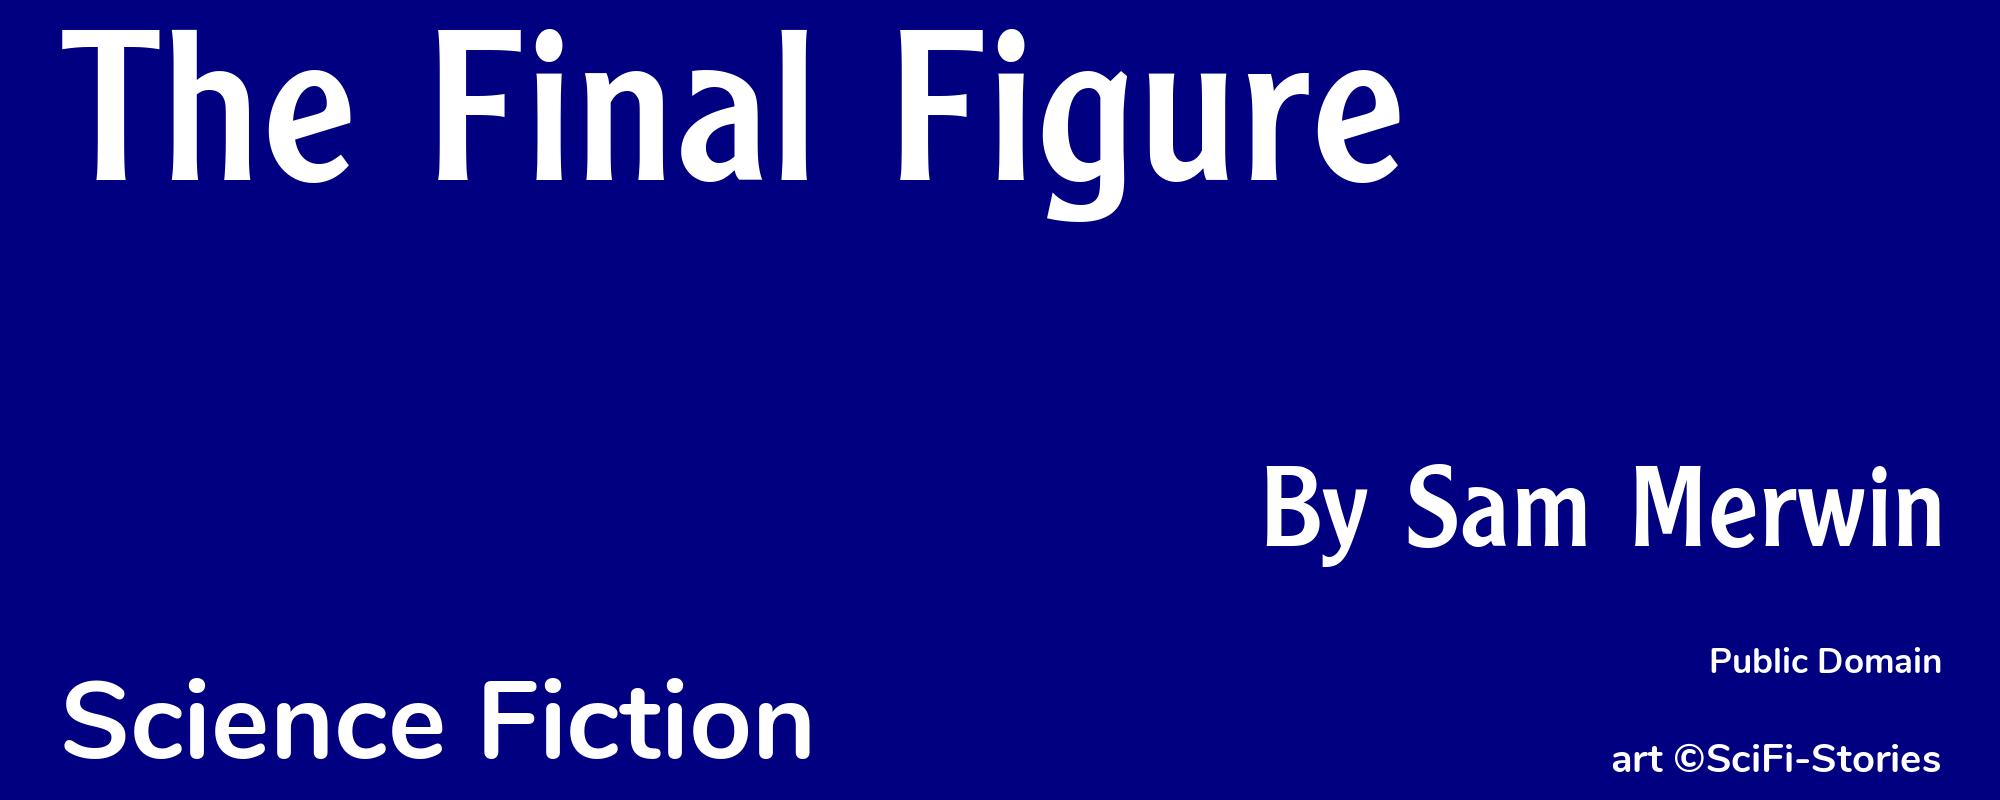 The Final Figure - Cover